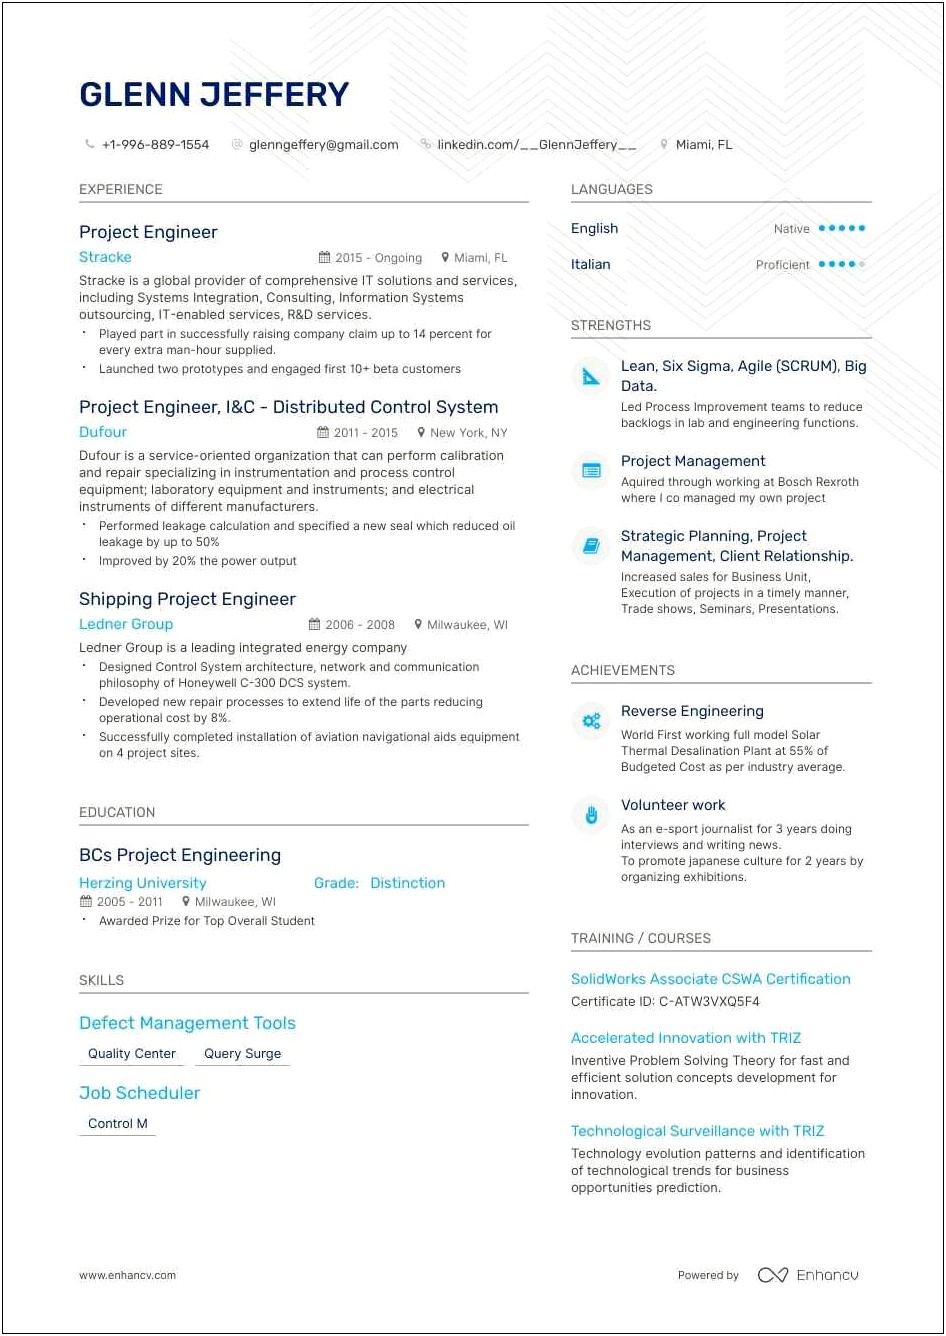 Construction Project Engineer Resume Sample